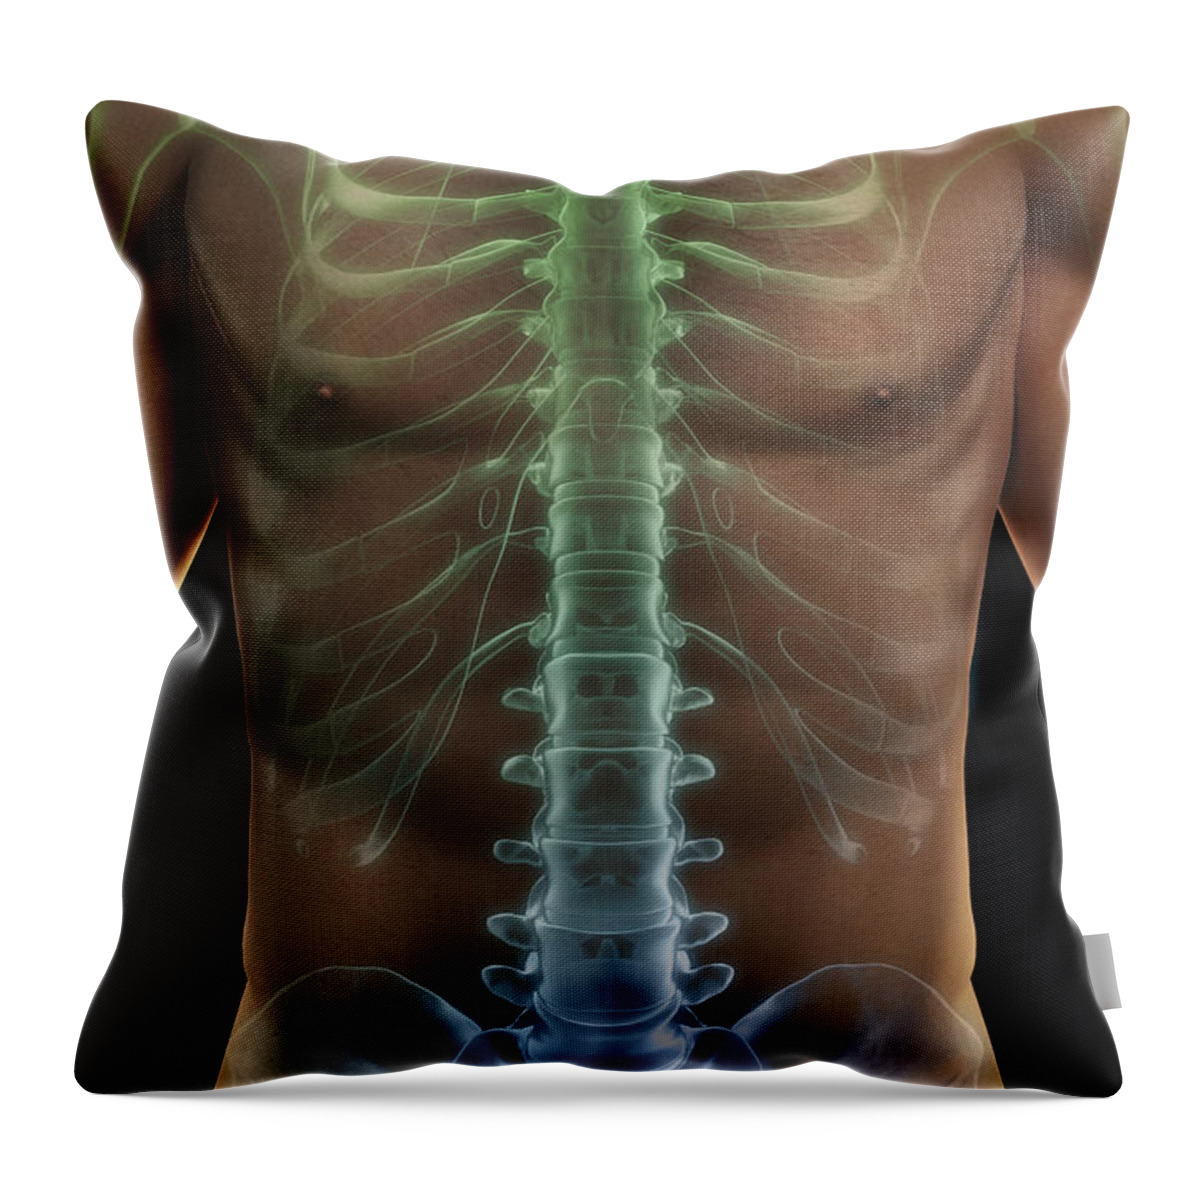 Vertebrae Throw Pillow featuring the photograph Bones Of The Torso #10 by Science Picture Co